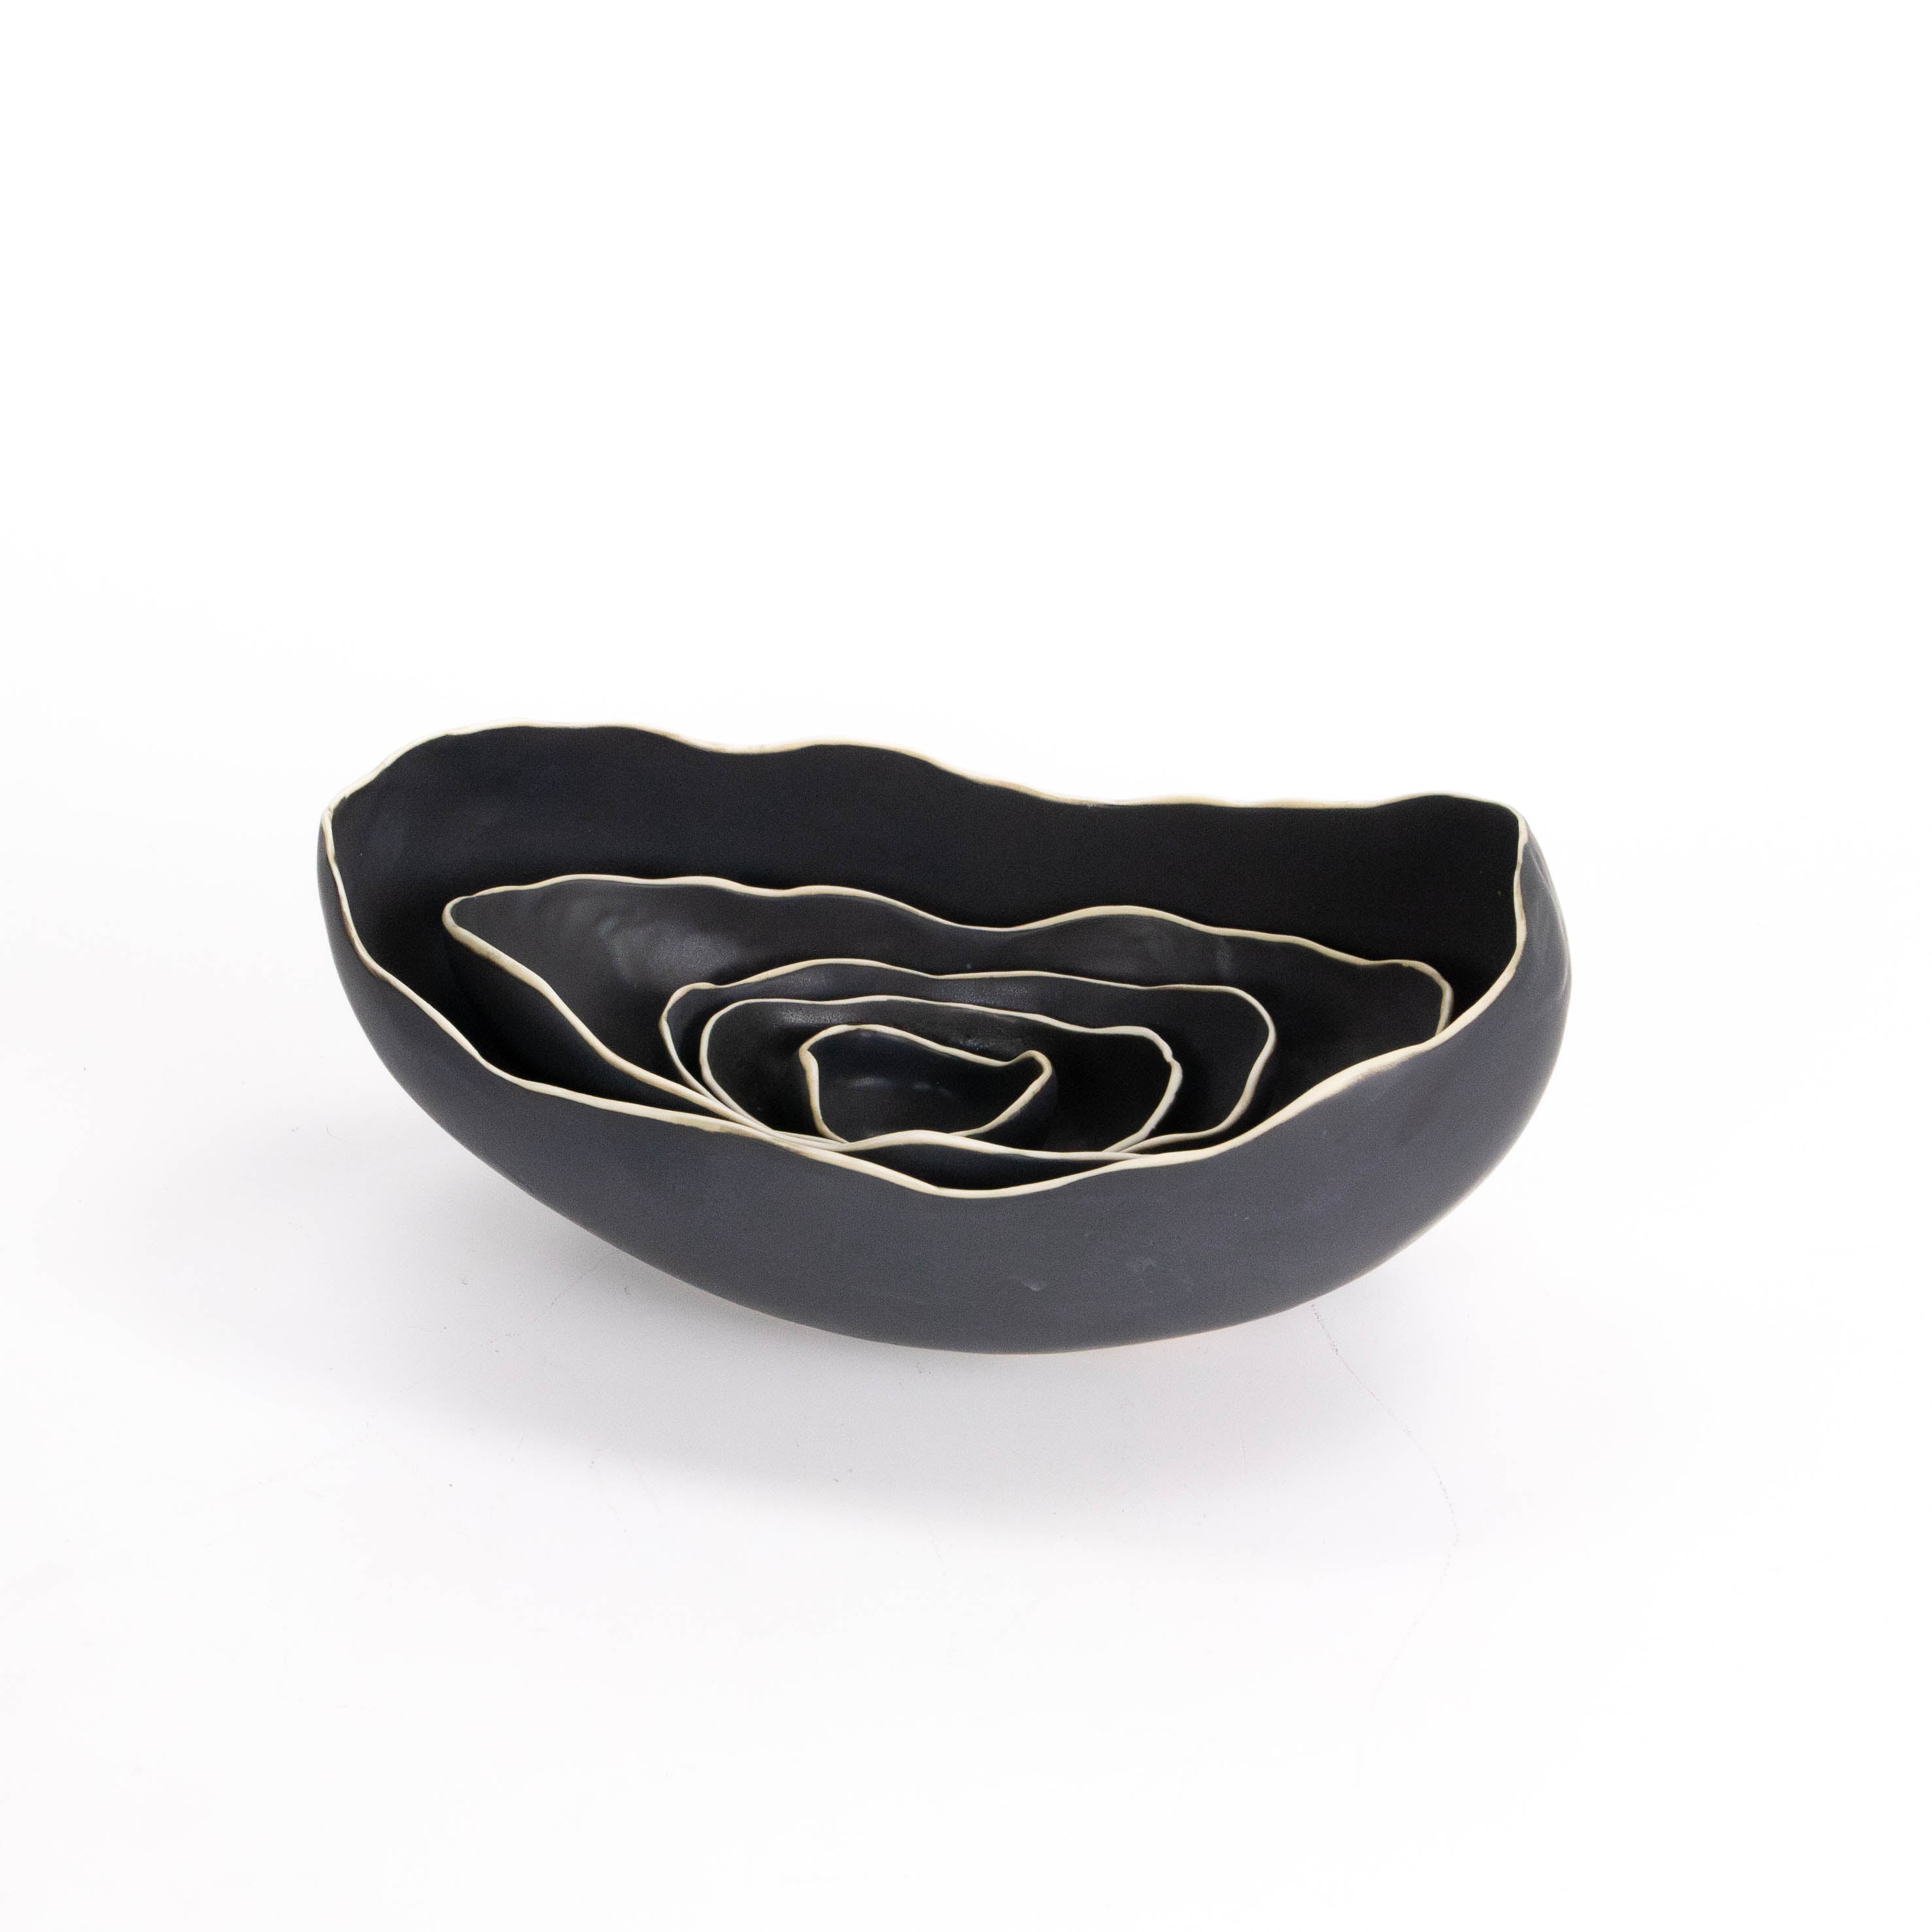 Small Black Oval Stacking Bowl Set